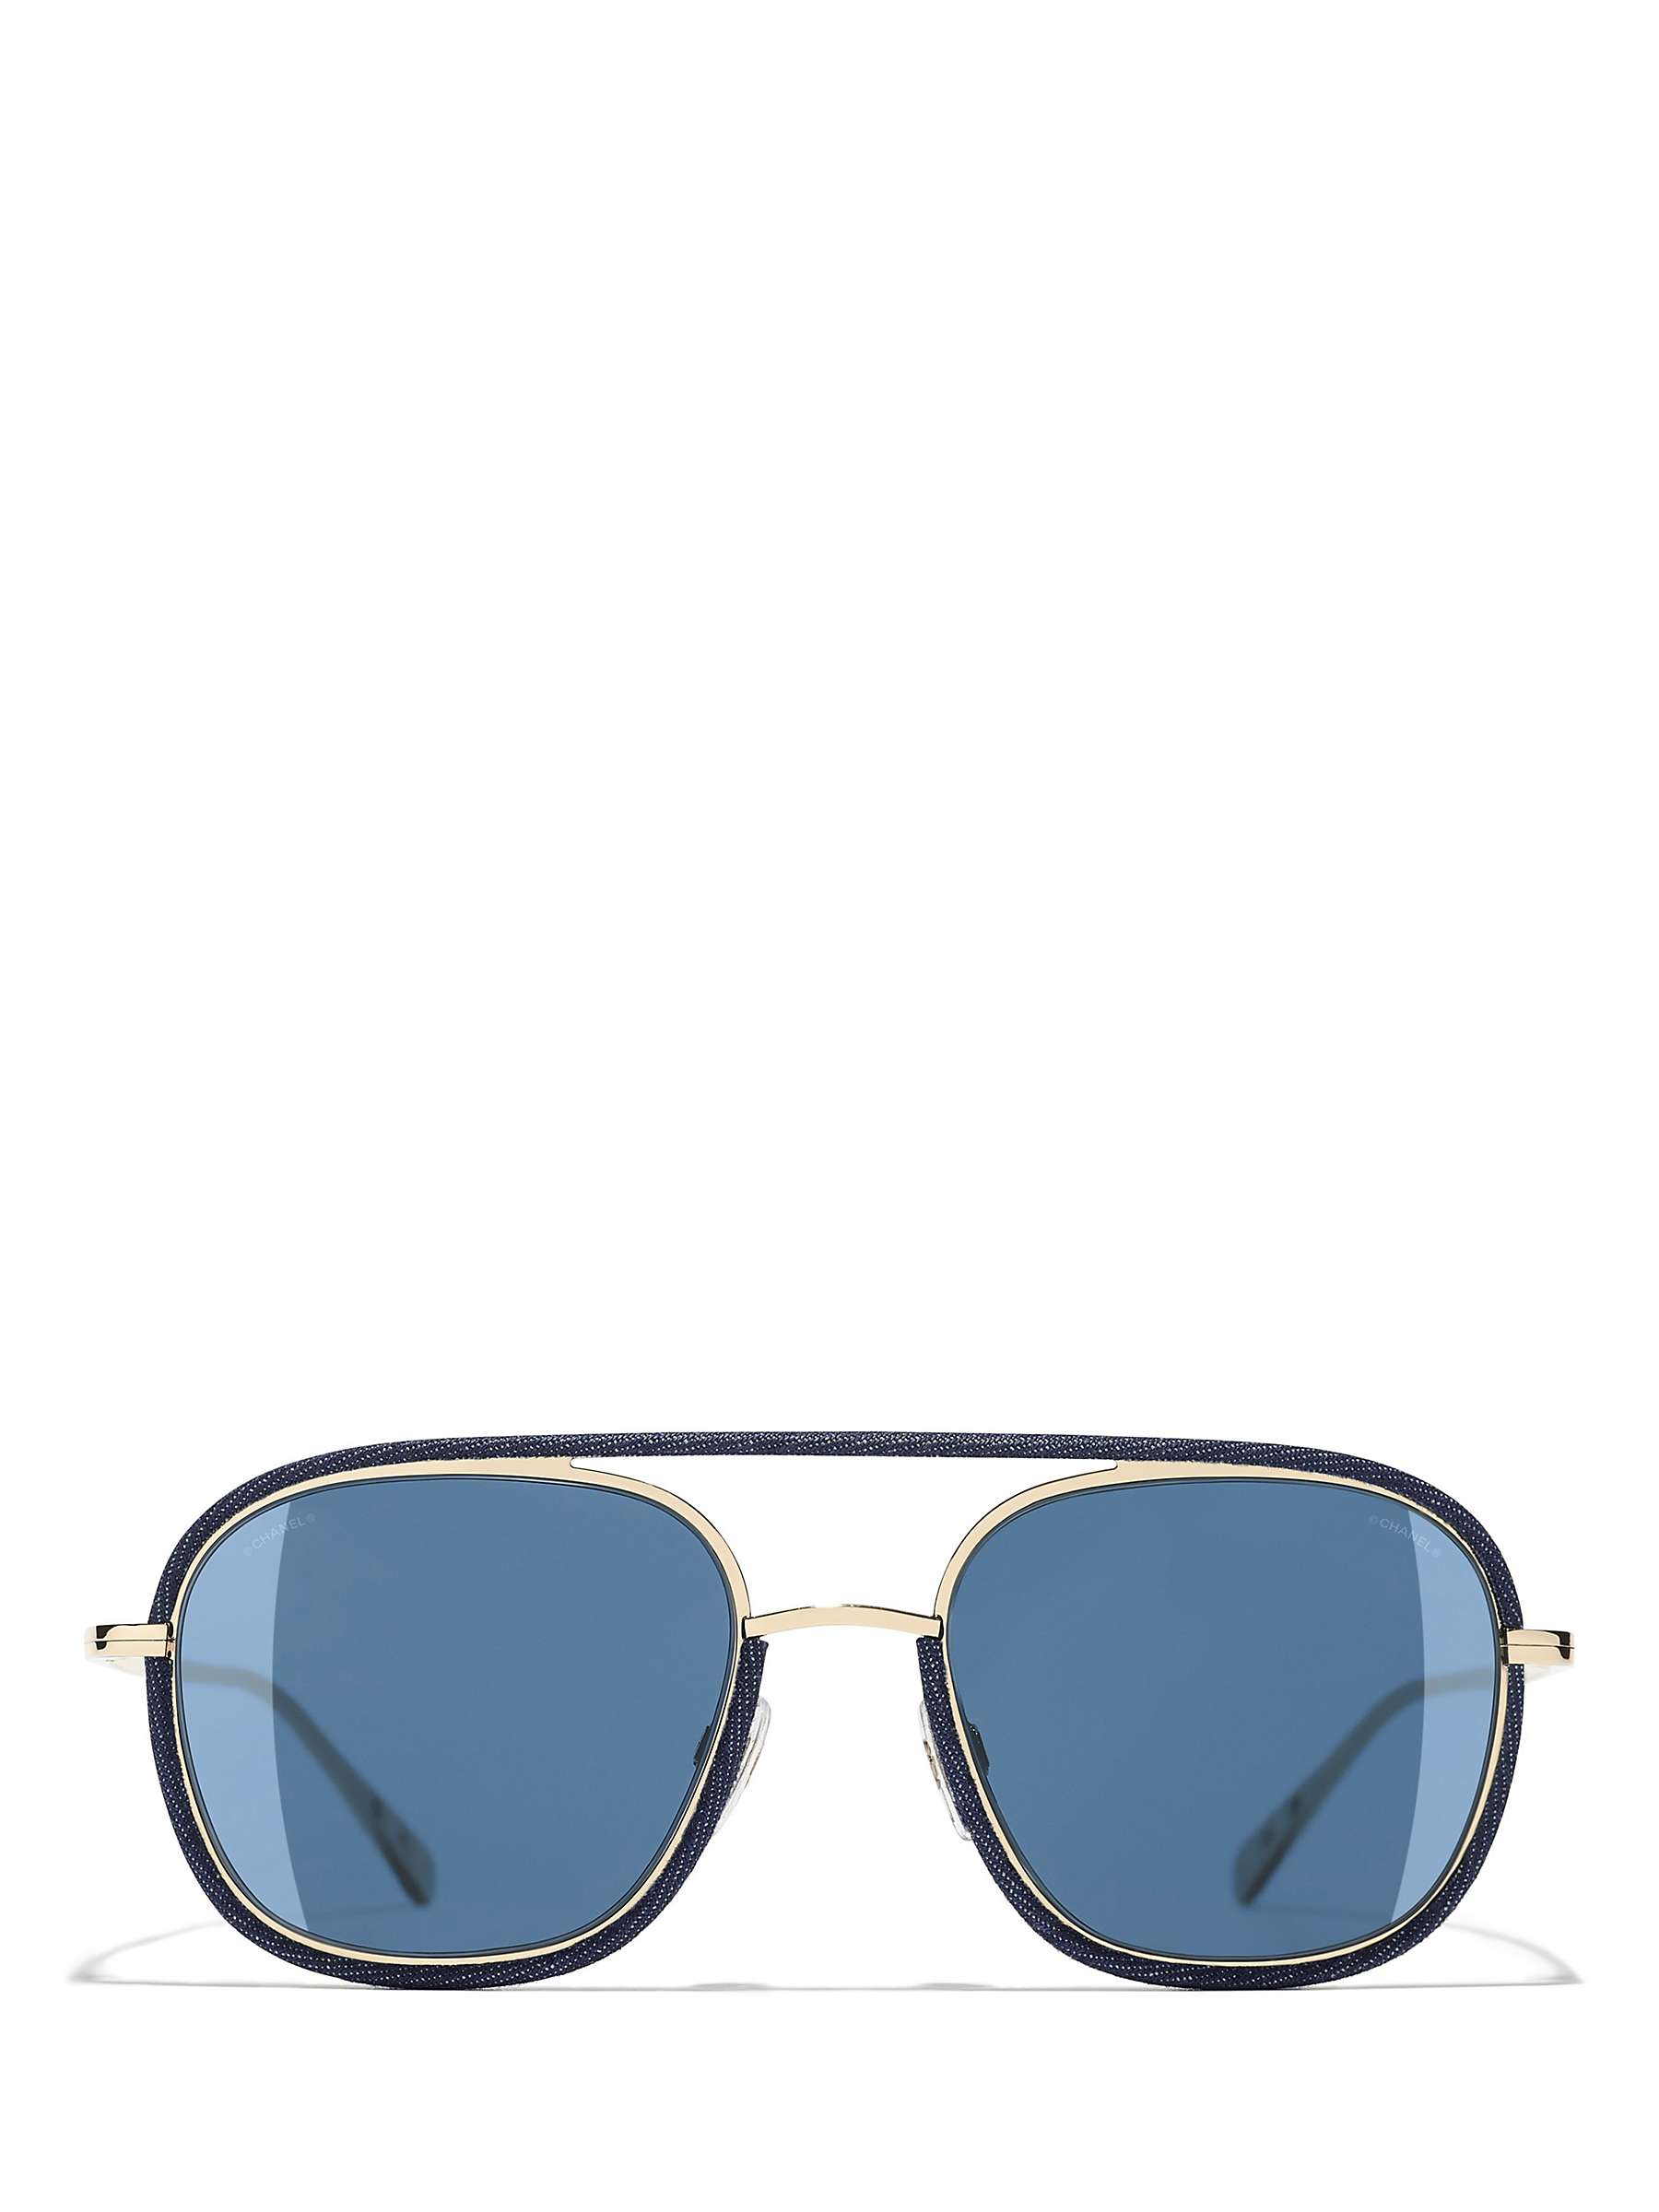 CHANEL Oval Sunglasses CH4249J Gold/Blue at John Lewis & Partners